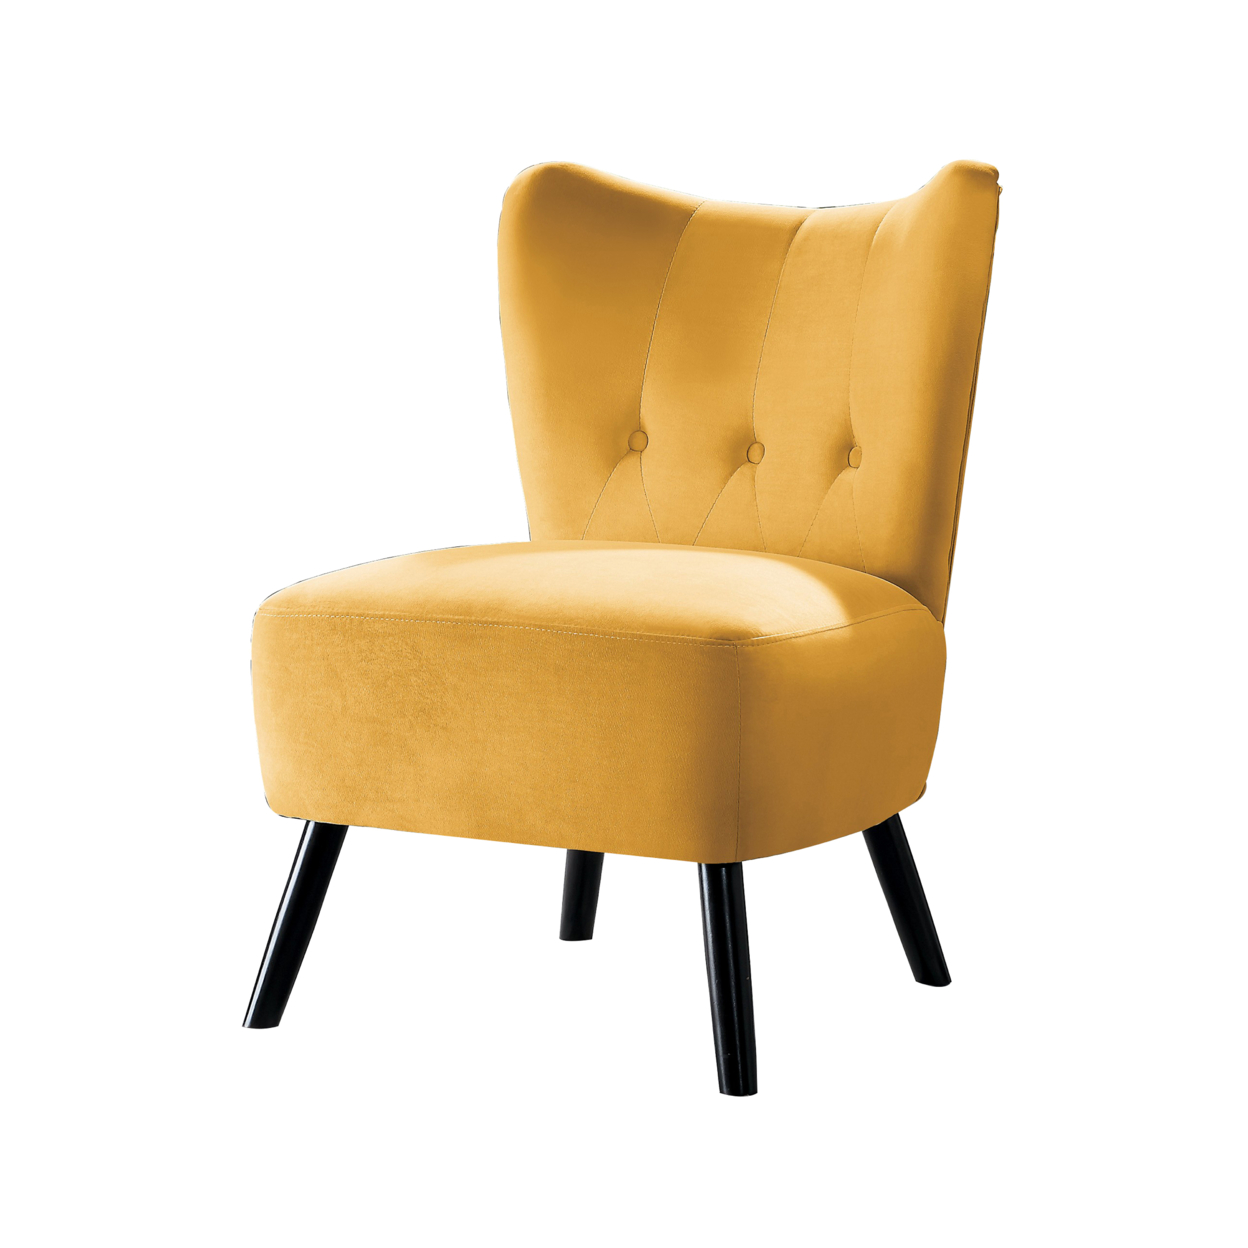 Upholstered Armless Accent Chair With Flared Back And Button Tufting, Yellow- Saltoro Sherpi